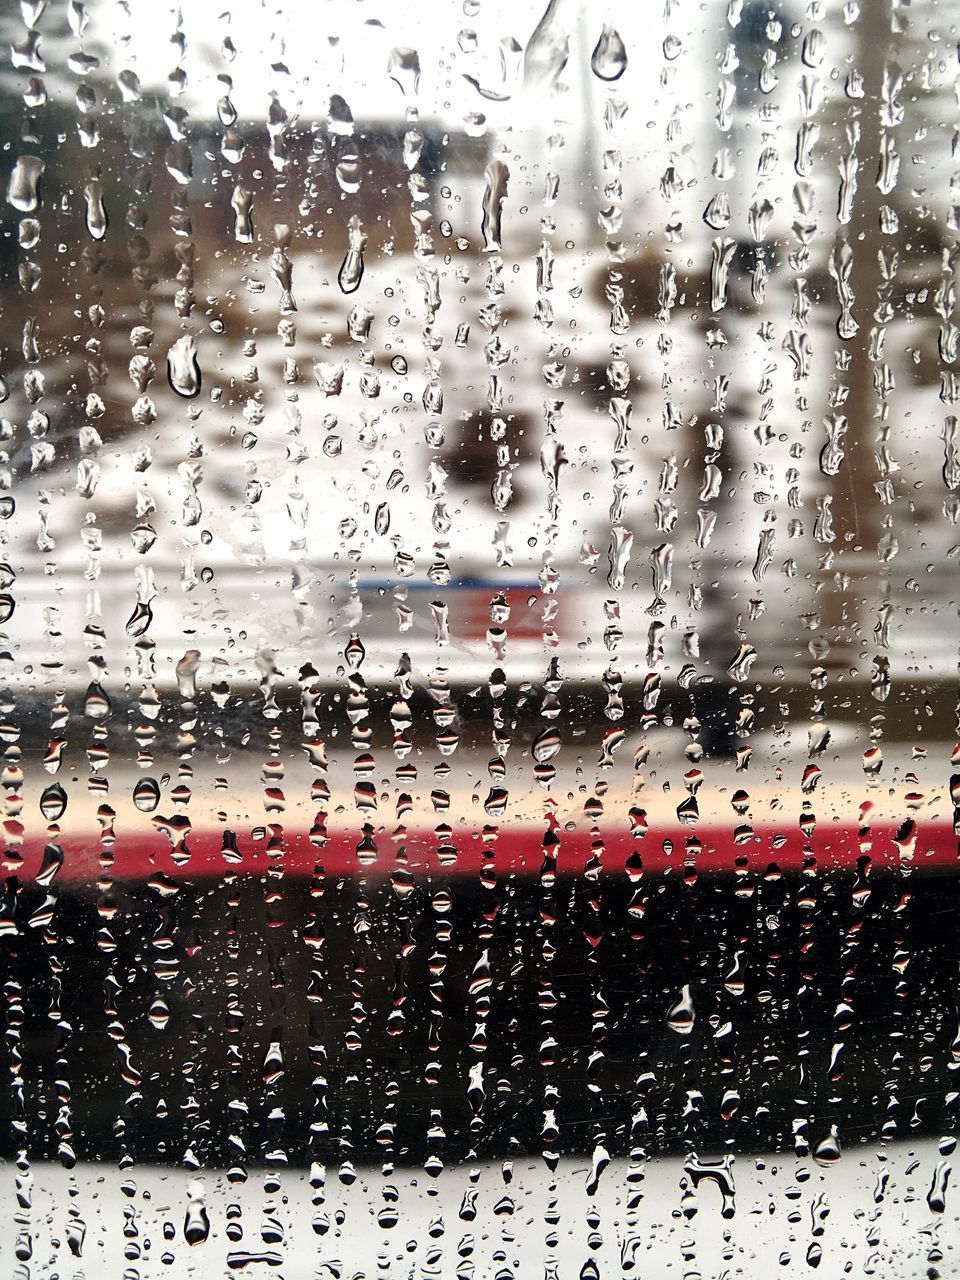 CLOSE-UP OF WATERDROPS ON GLASS WINDOW